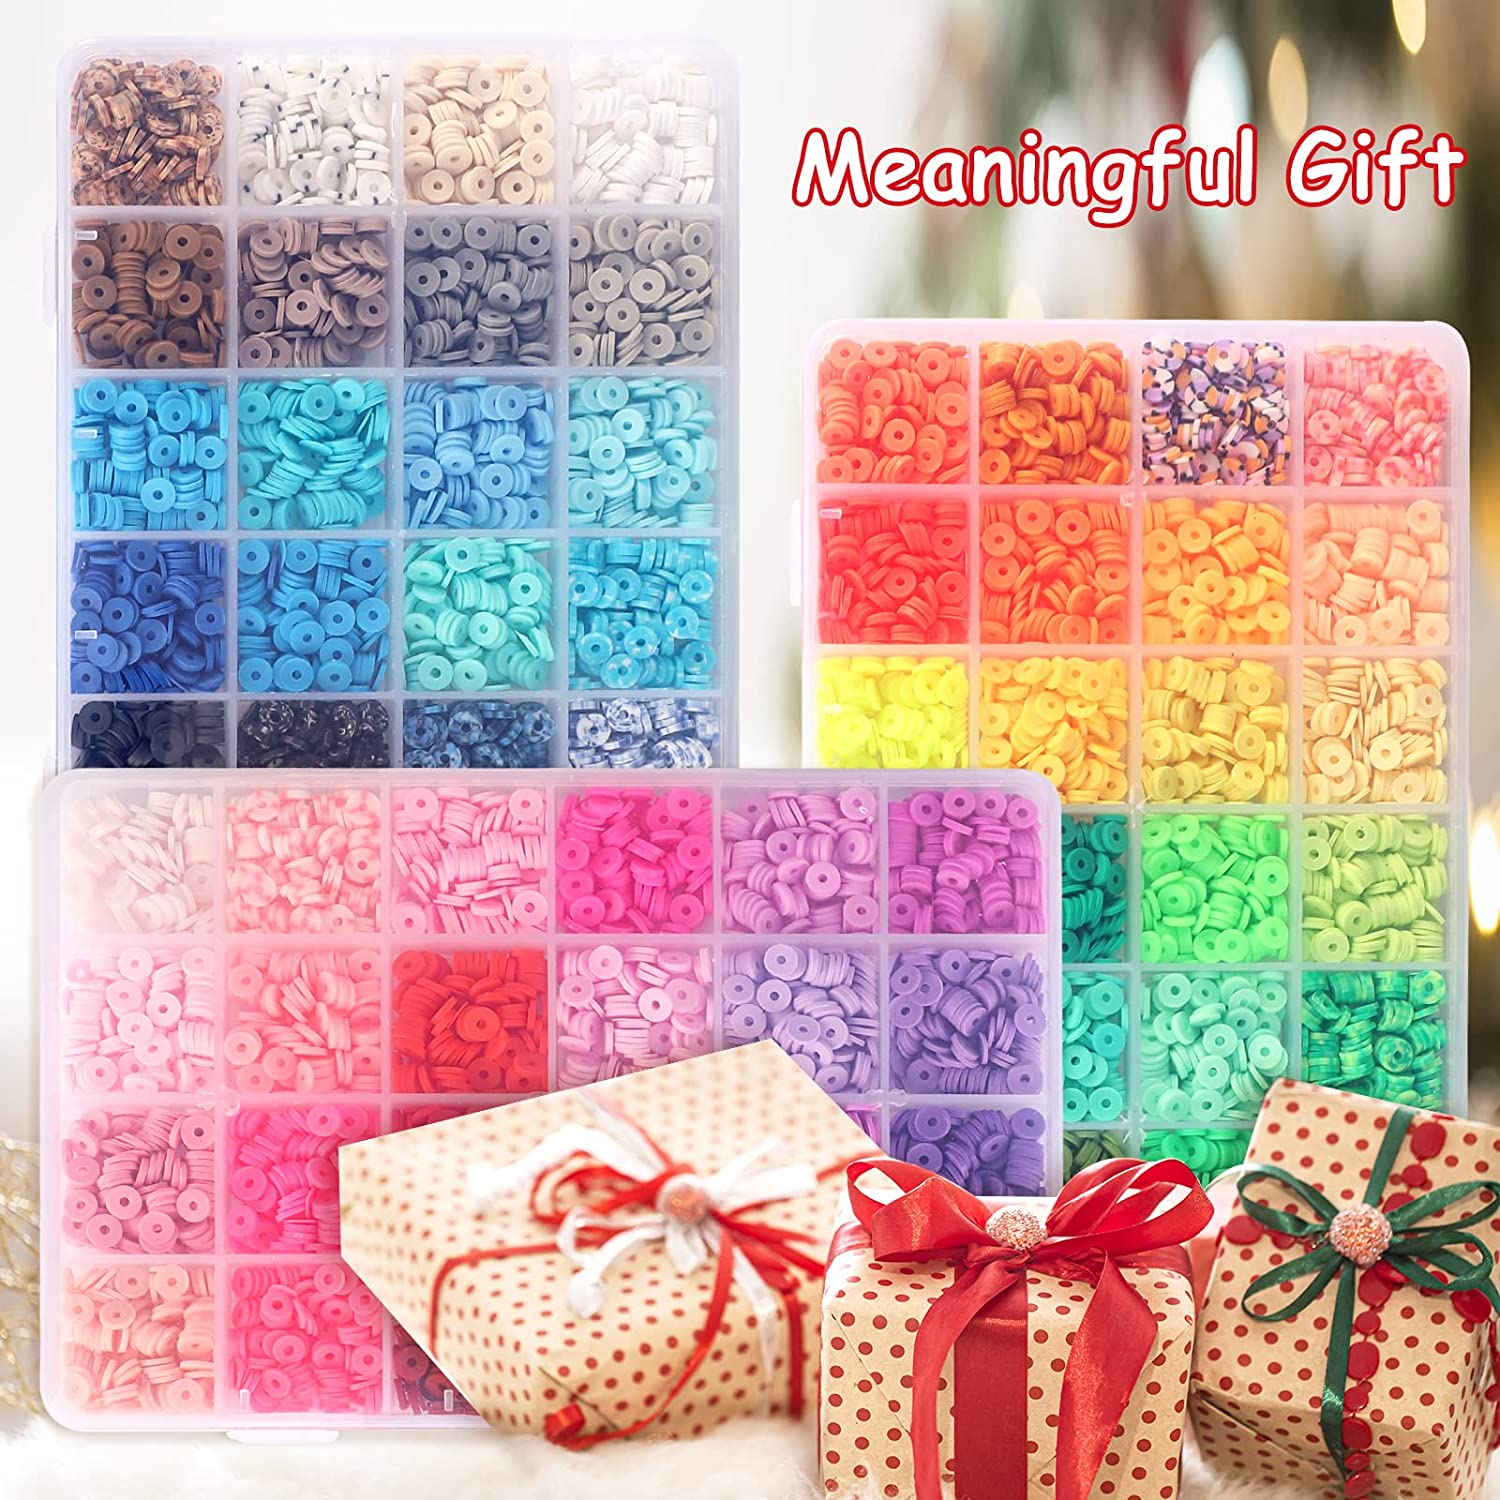  QUEFE 15350pcs, 72 Colors Clay Beads for Bracelet Making Kit,  Jewelry Making Kit for Girls 8-12, Polymer Heishi Beads, Letter Beads for  Jewelry Making, for Gifts, Crafts, Preppy : Arts, Crafts